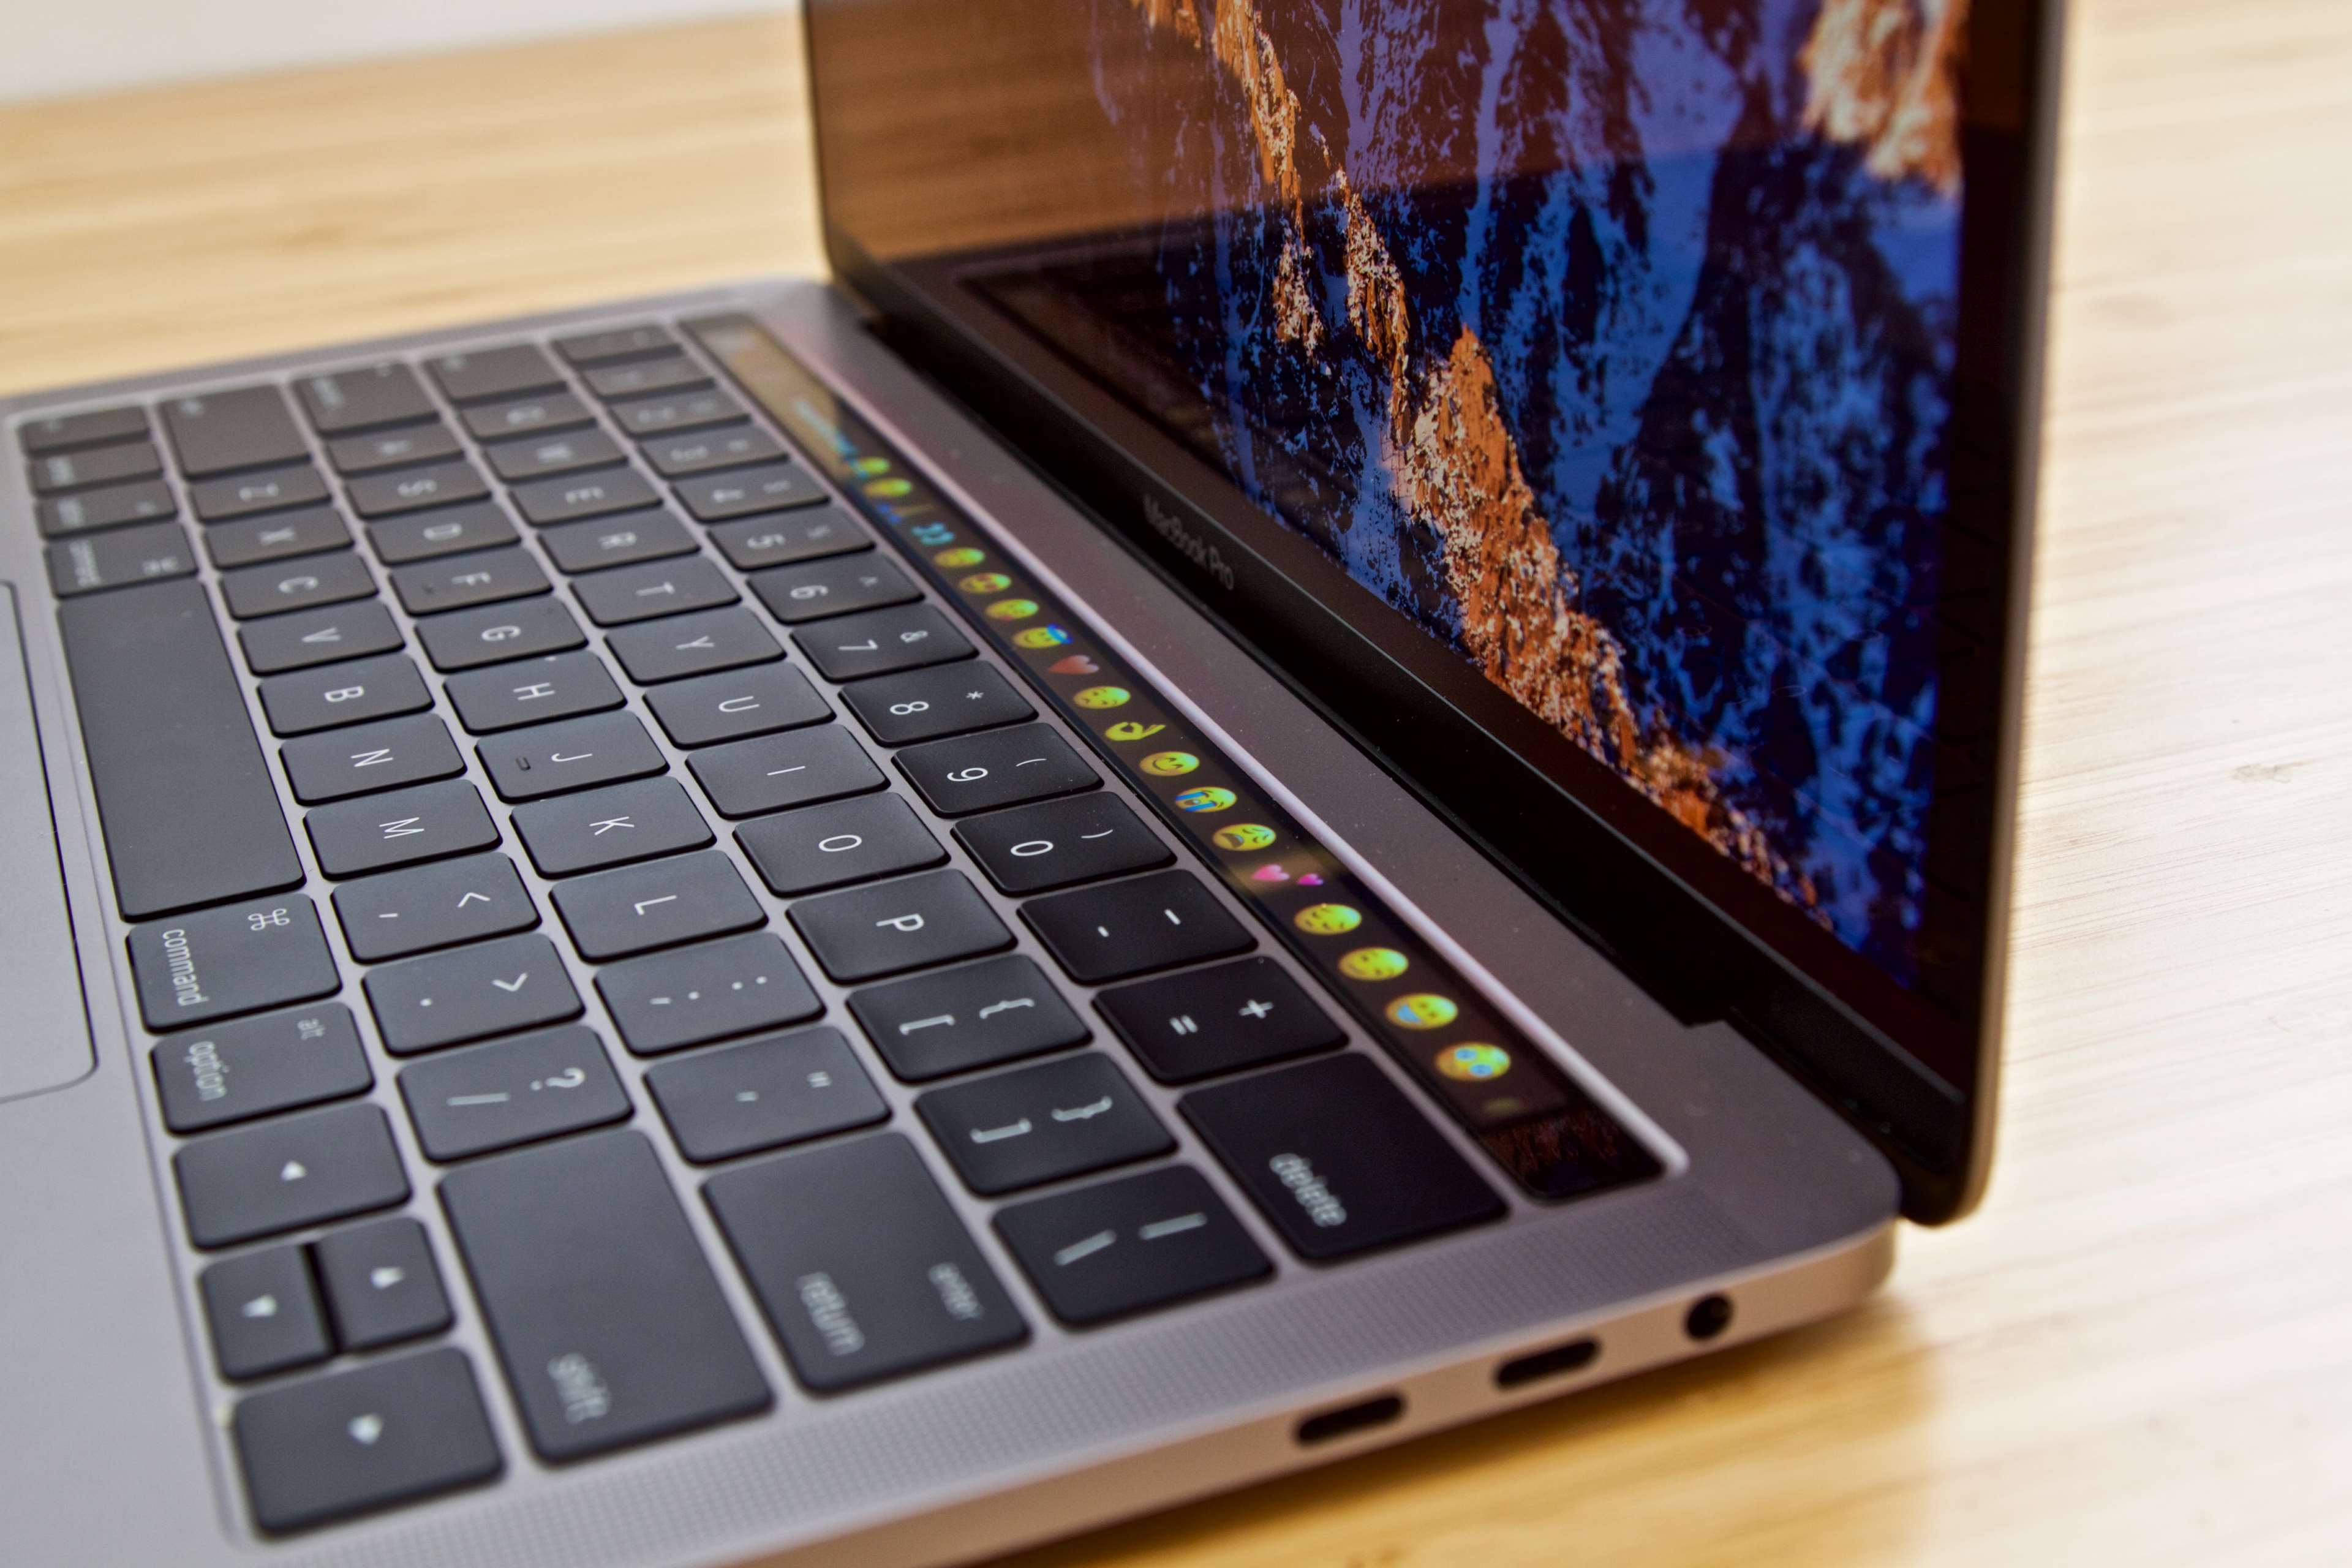 Touch Bar On The Macbook Pro - HD Wallpaper 